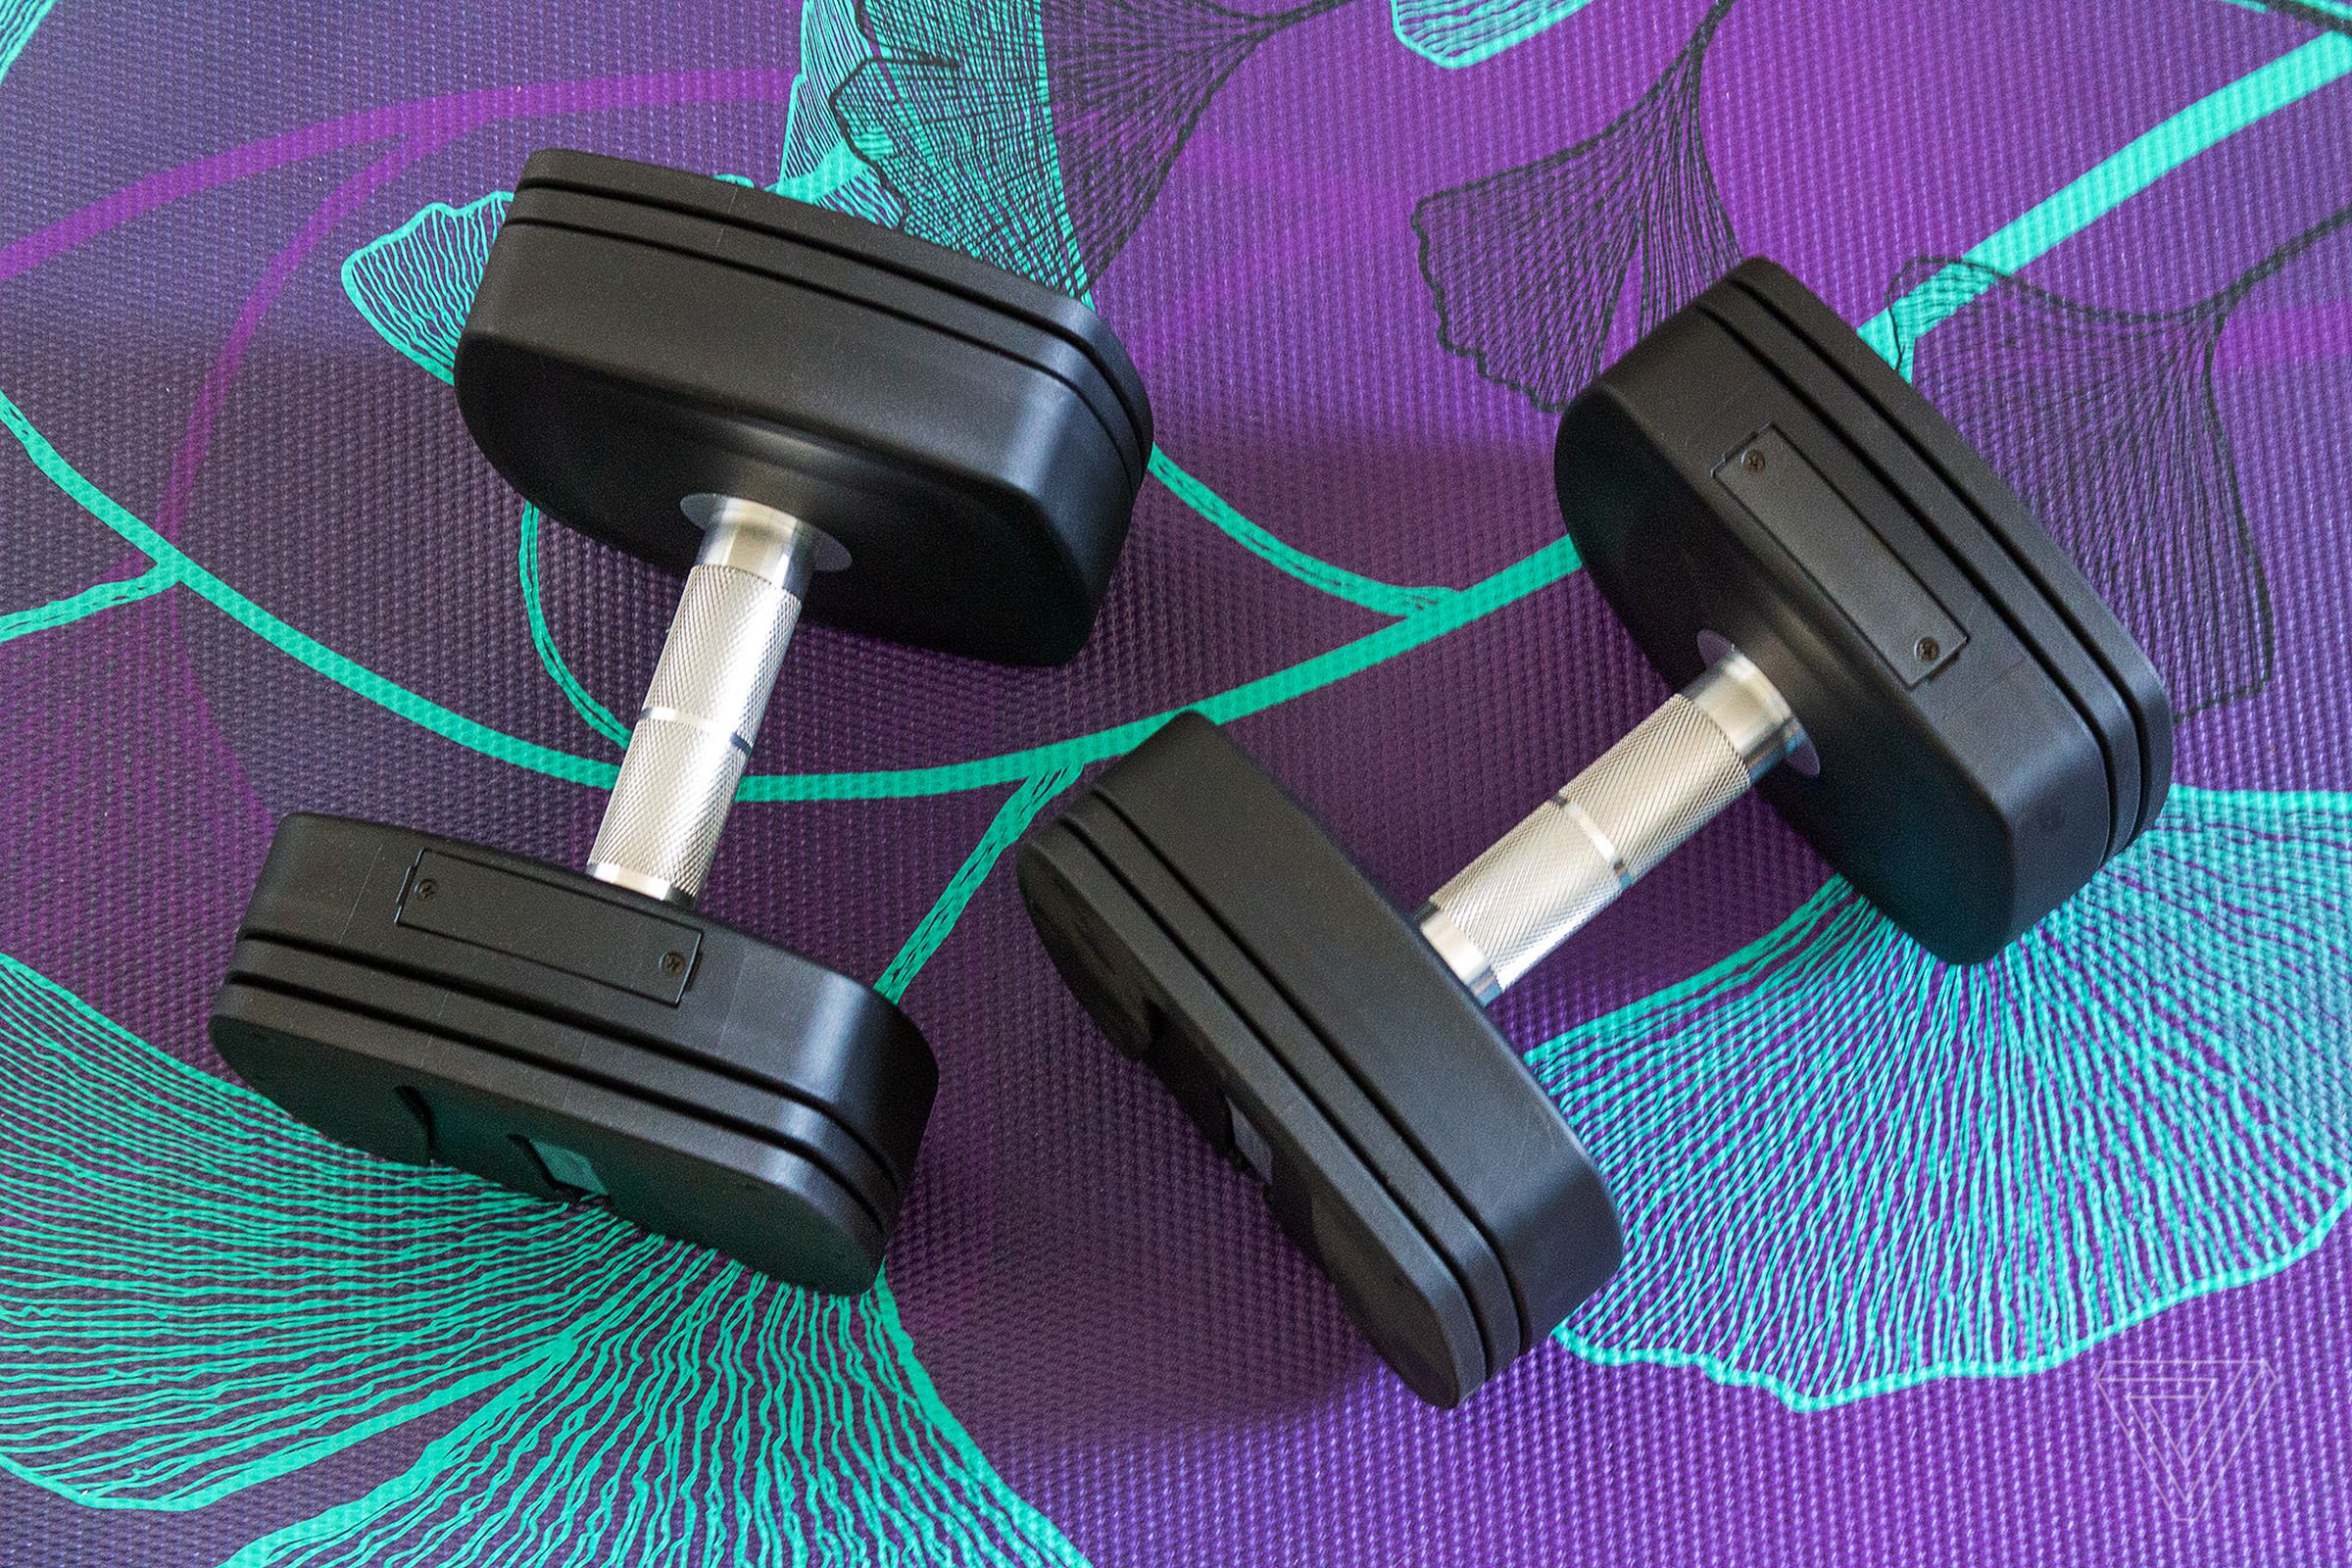 The NordicTrack iSelect Adjustable Dumbbells can be controlled with Alexa.